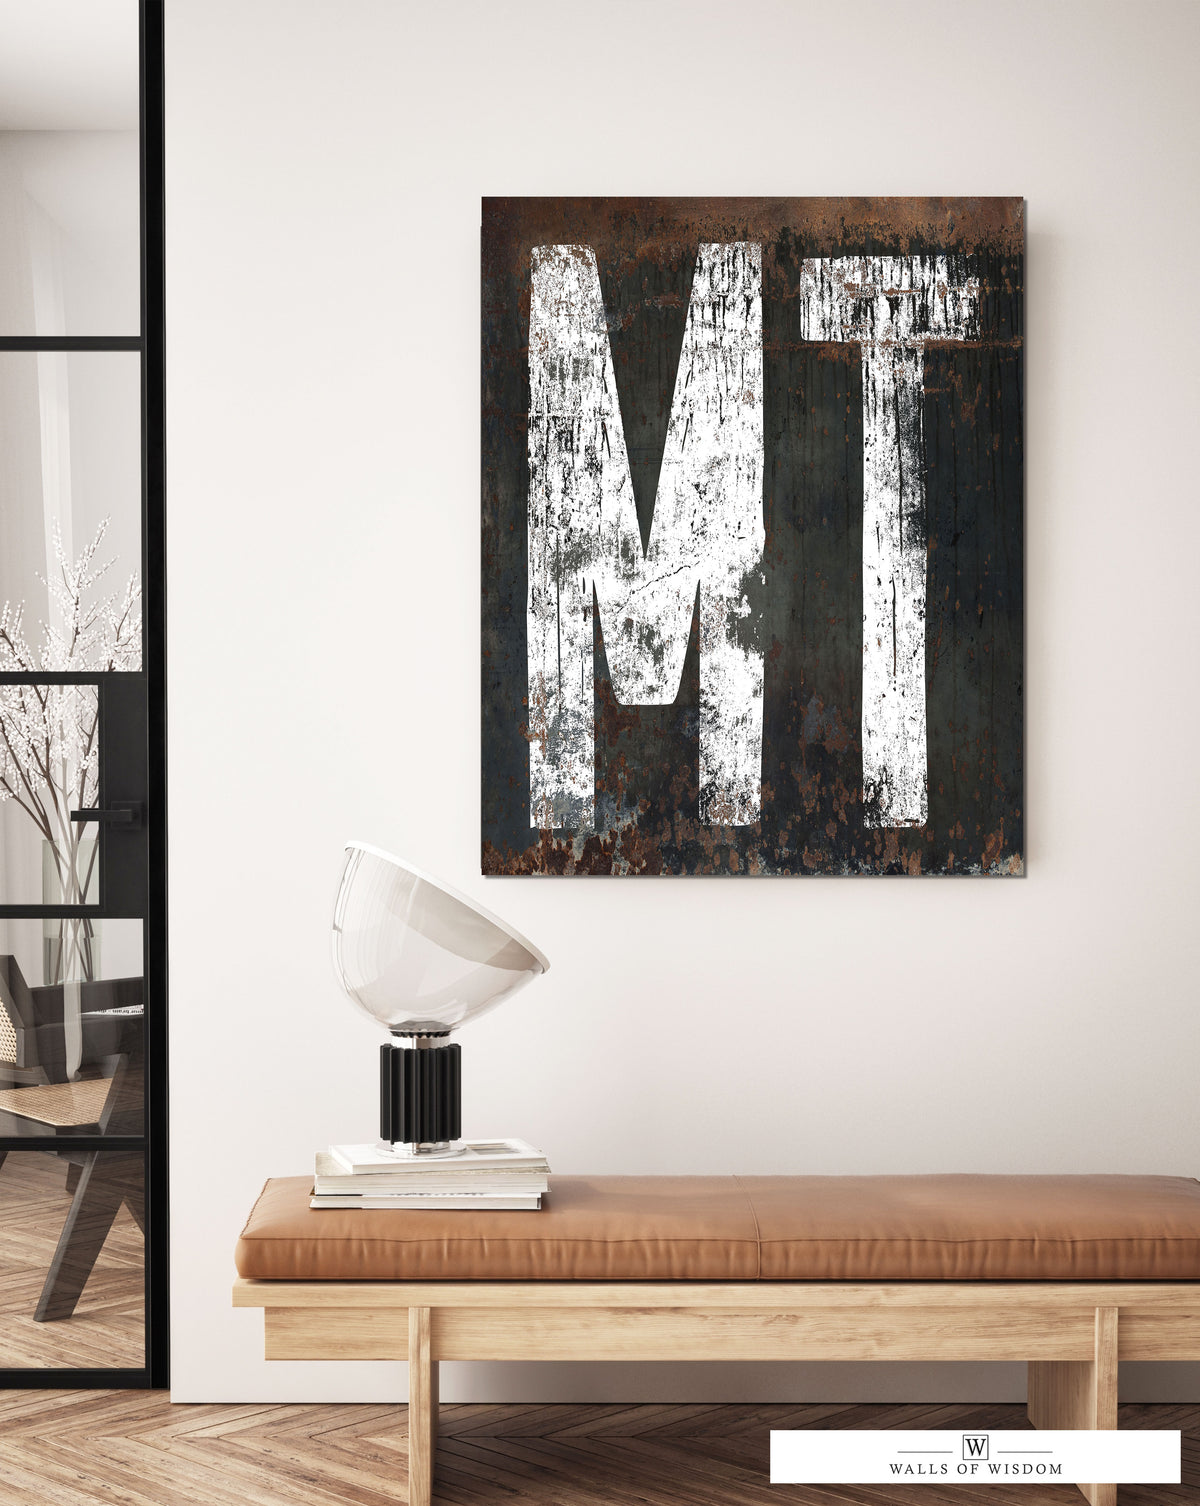 Rustic Montana Home State Canvas Wall Art - Vintage Western Style